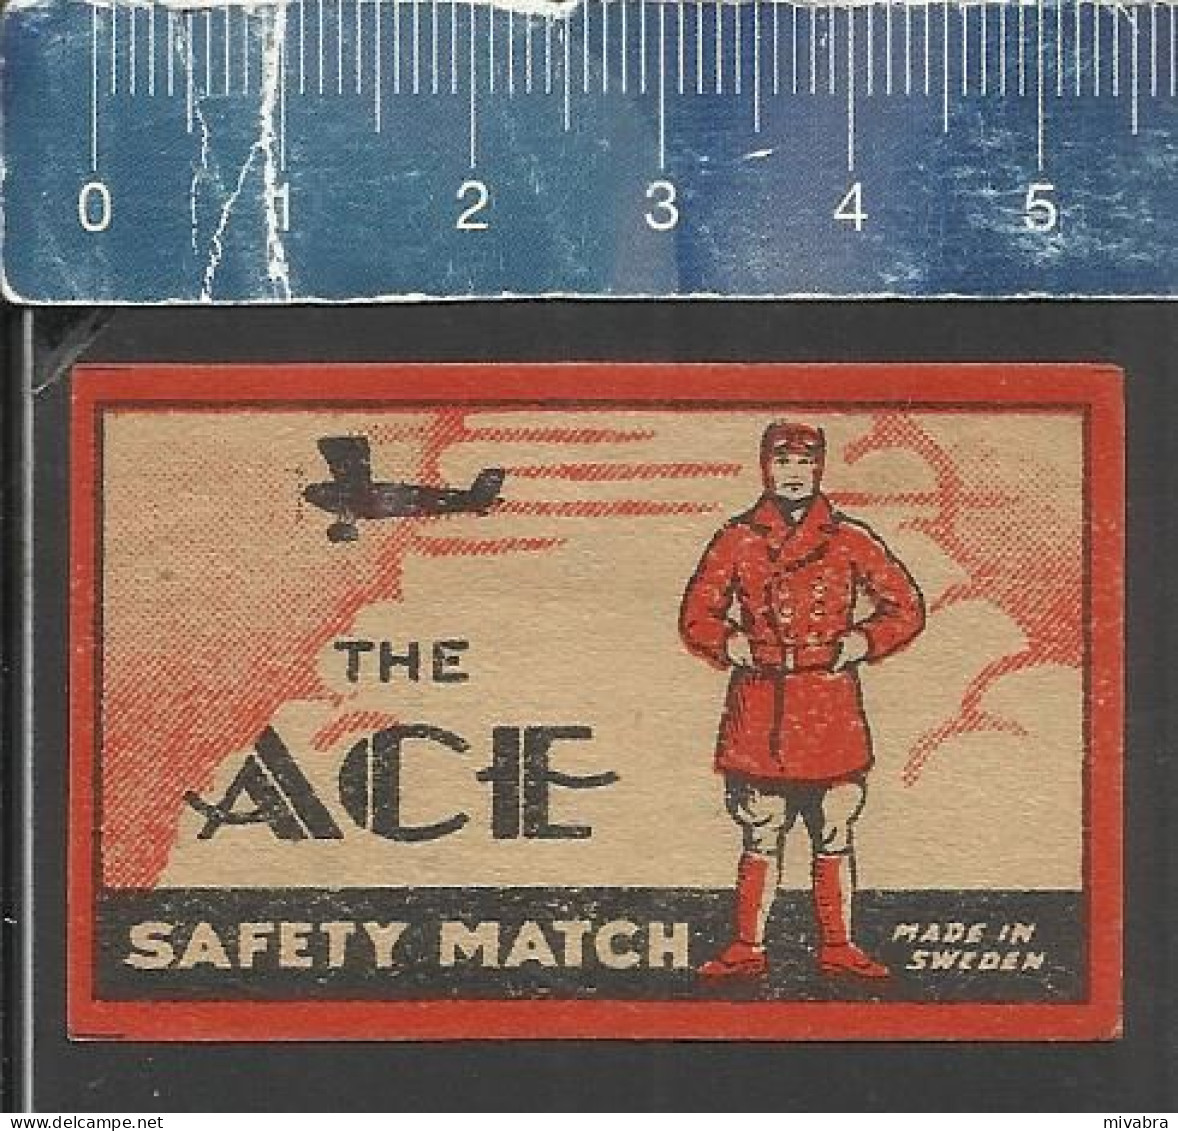 THE ACE (flying Ace Fighter Ace Or Air Ace Is A Military Aviator Shooting Down Enemy Aircraft) OLD MATCHBOX LABEL SWEDEN - Cajas De Cerillas - Etiquetas